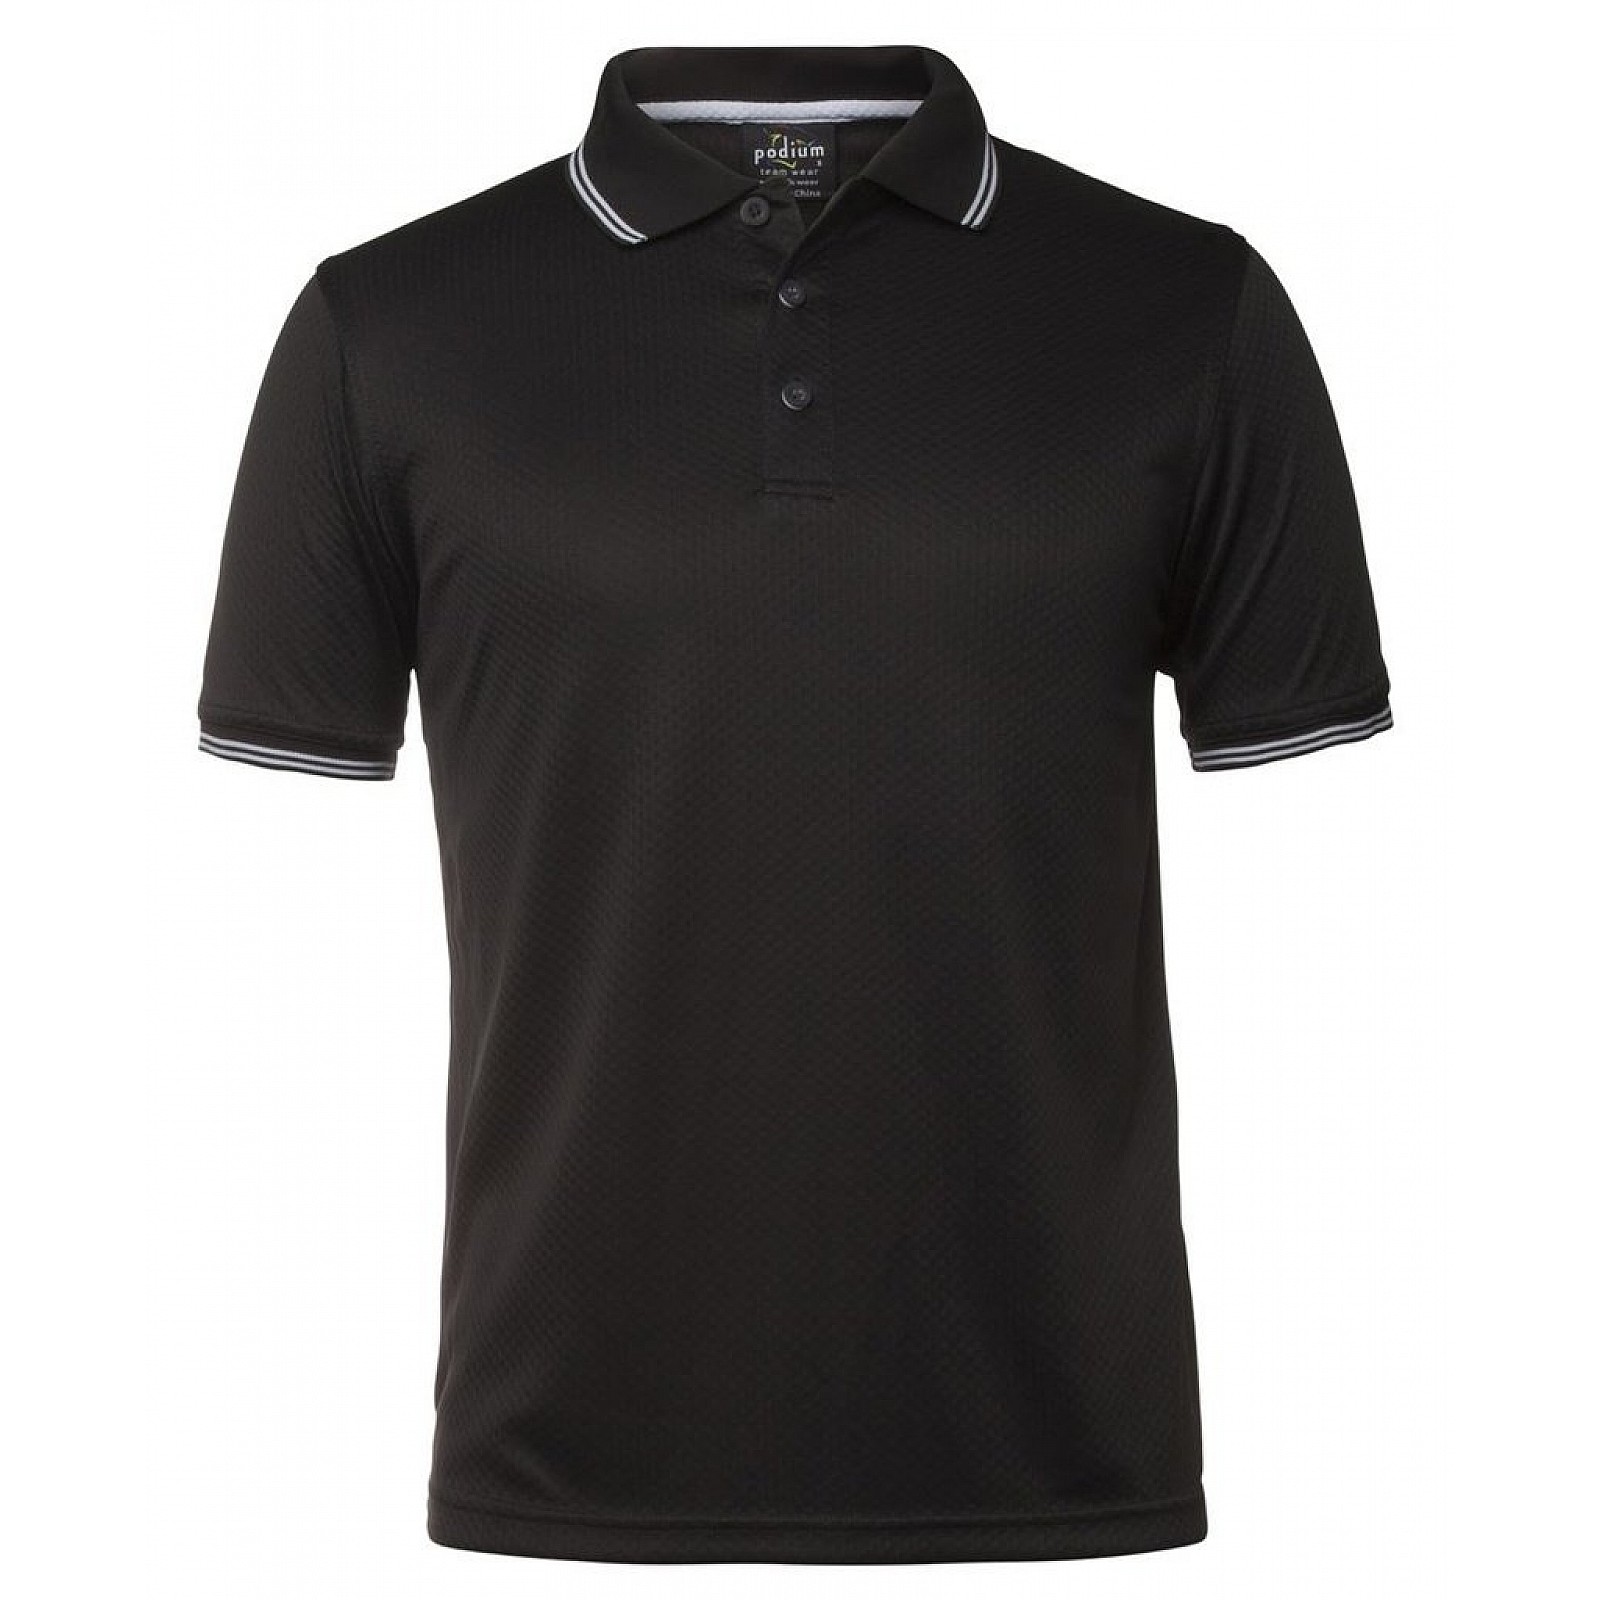 Polo Shirt With Pin Stripe Colar and Sleeves | Buy Online Protective ...